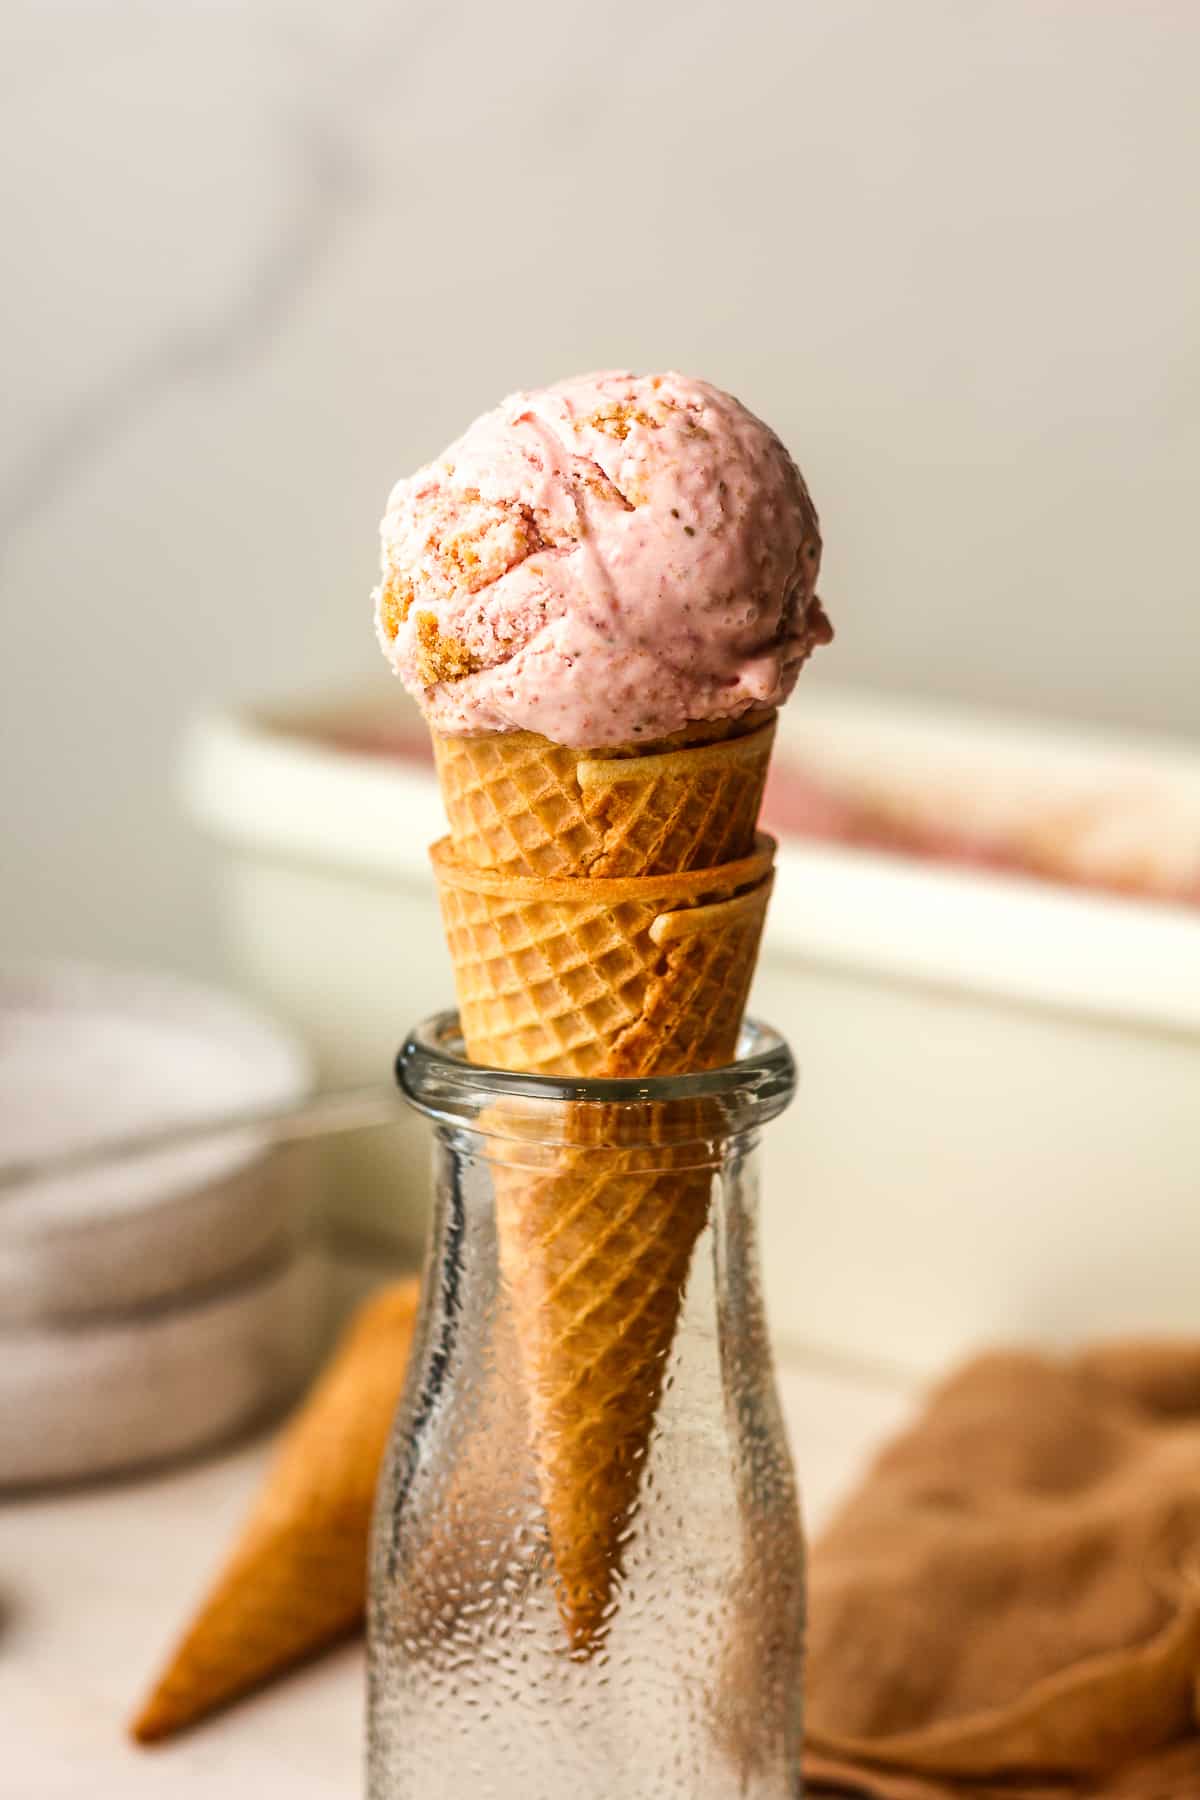 Side view of a sugar cone with a scoop of ice cream on top.